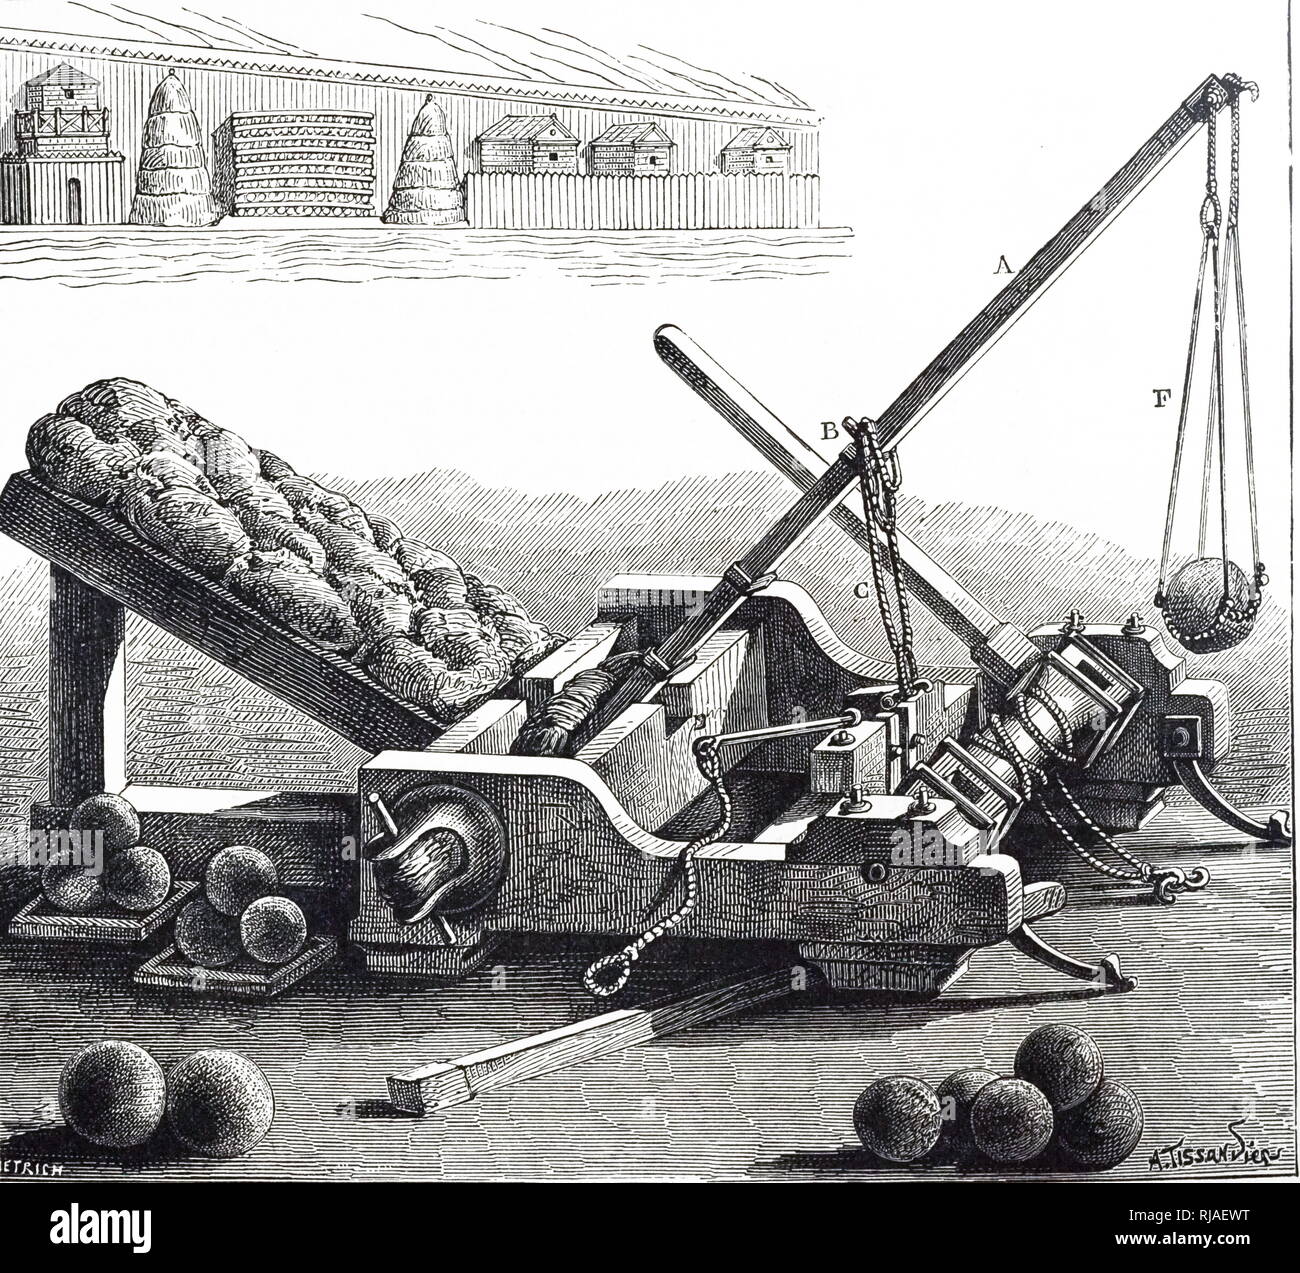 An engraving depicting the reconstruction of Onager, an imperial-era Roman torsion powered siege engine, used to fling stones. Dated 19th century Stock Photo